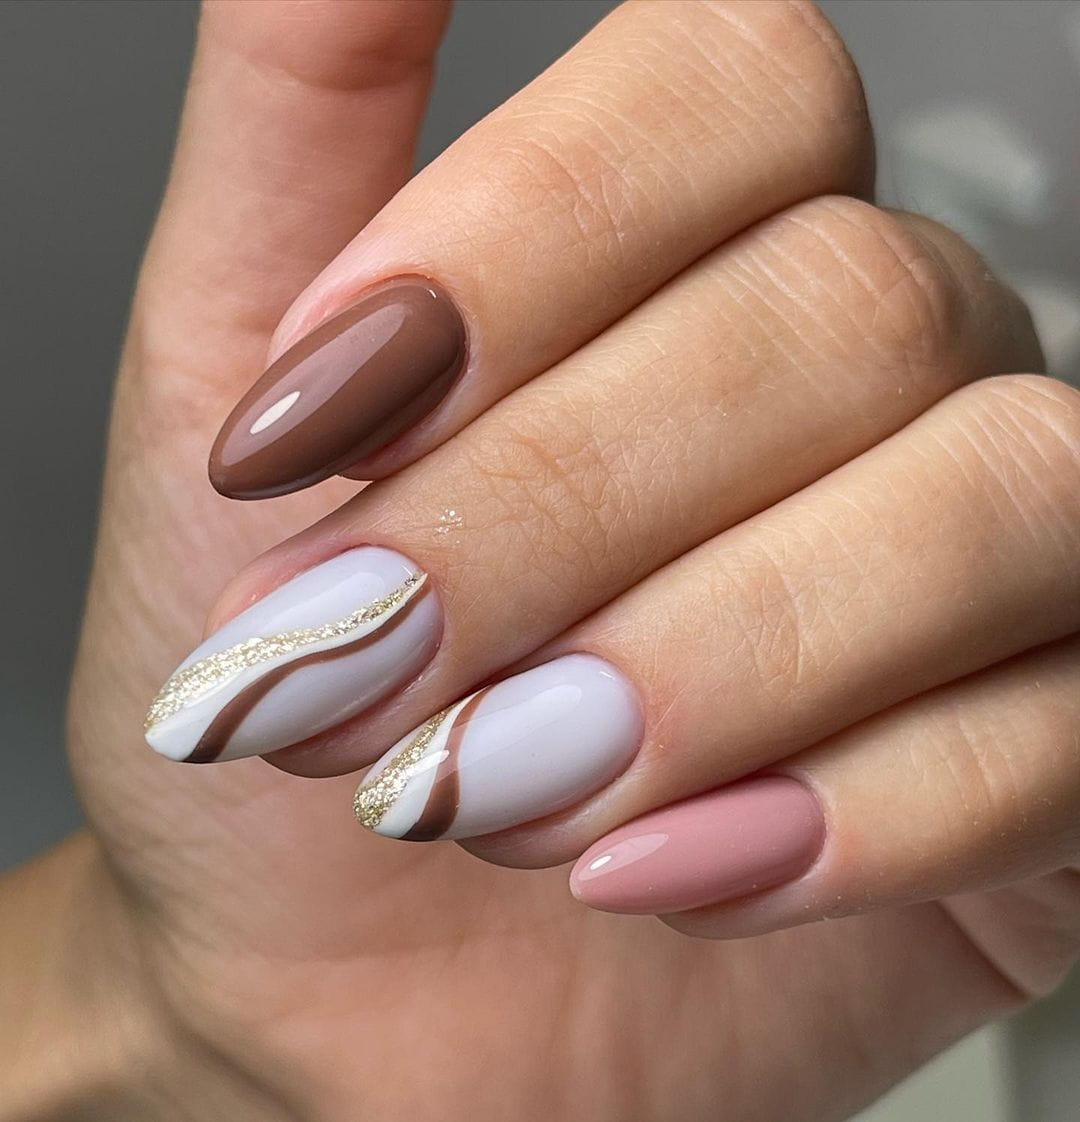 50+ Cute Short Nail Designs You’ll Want To Try Today images 30